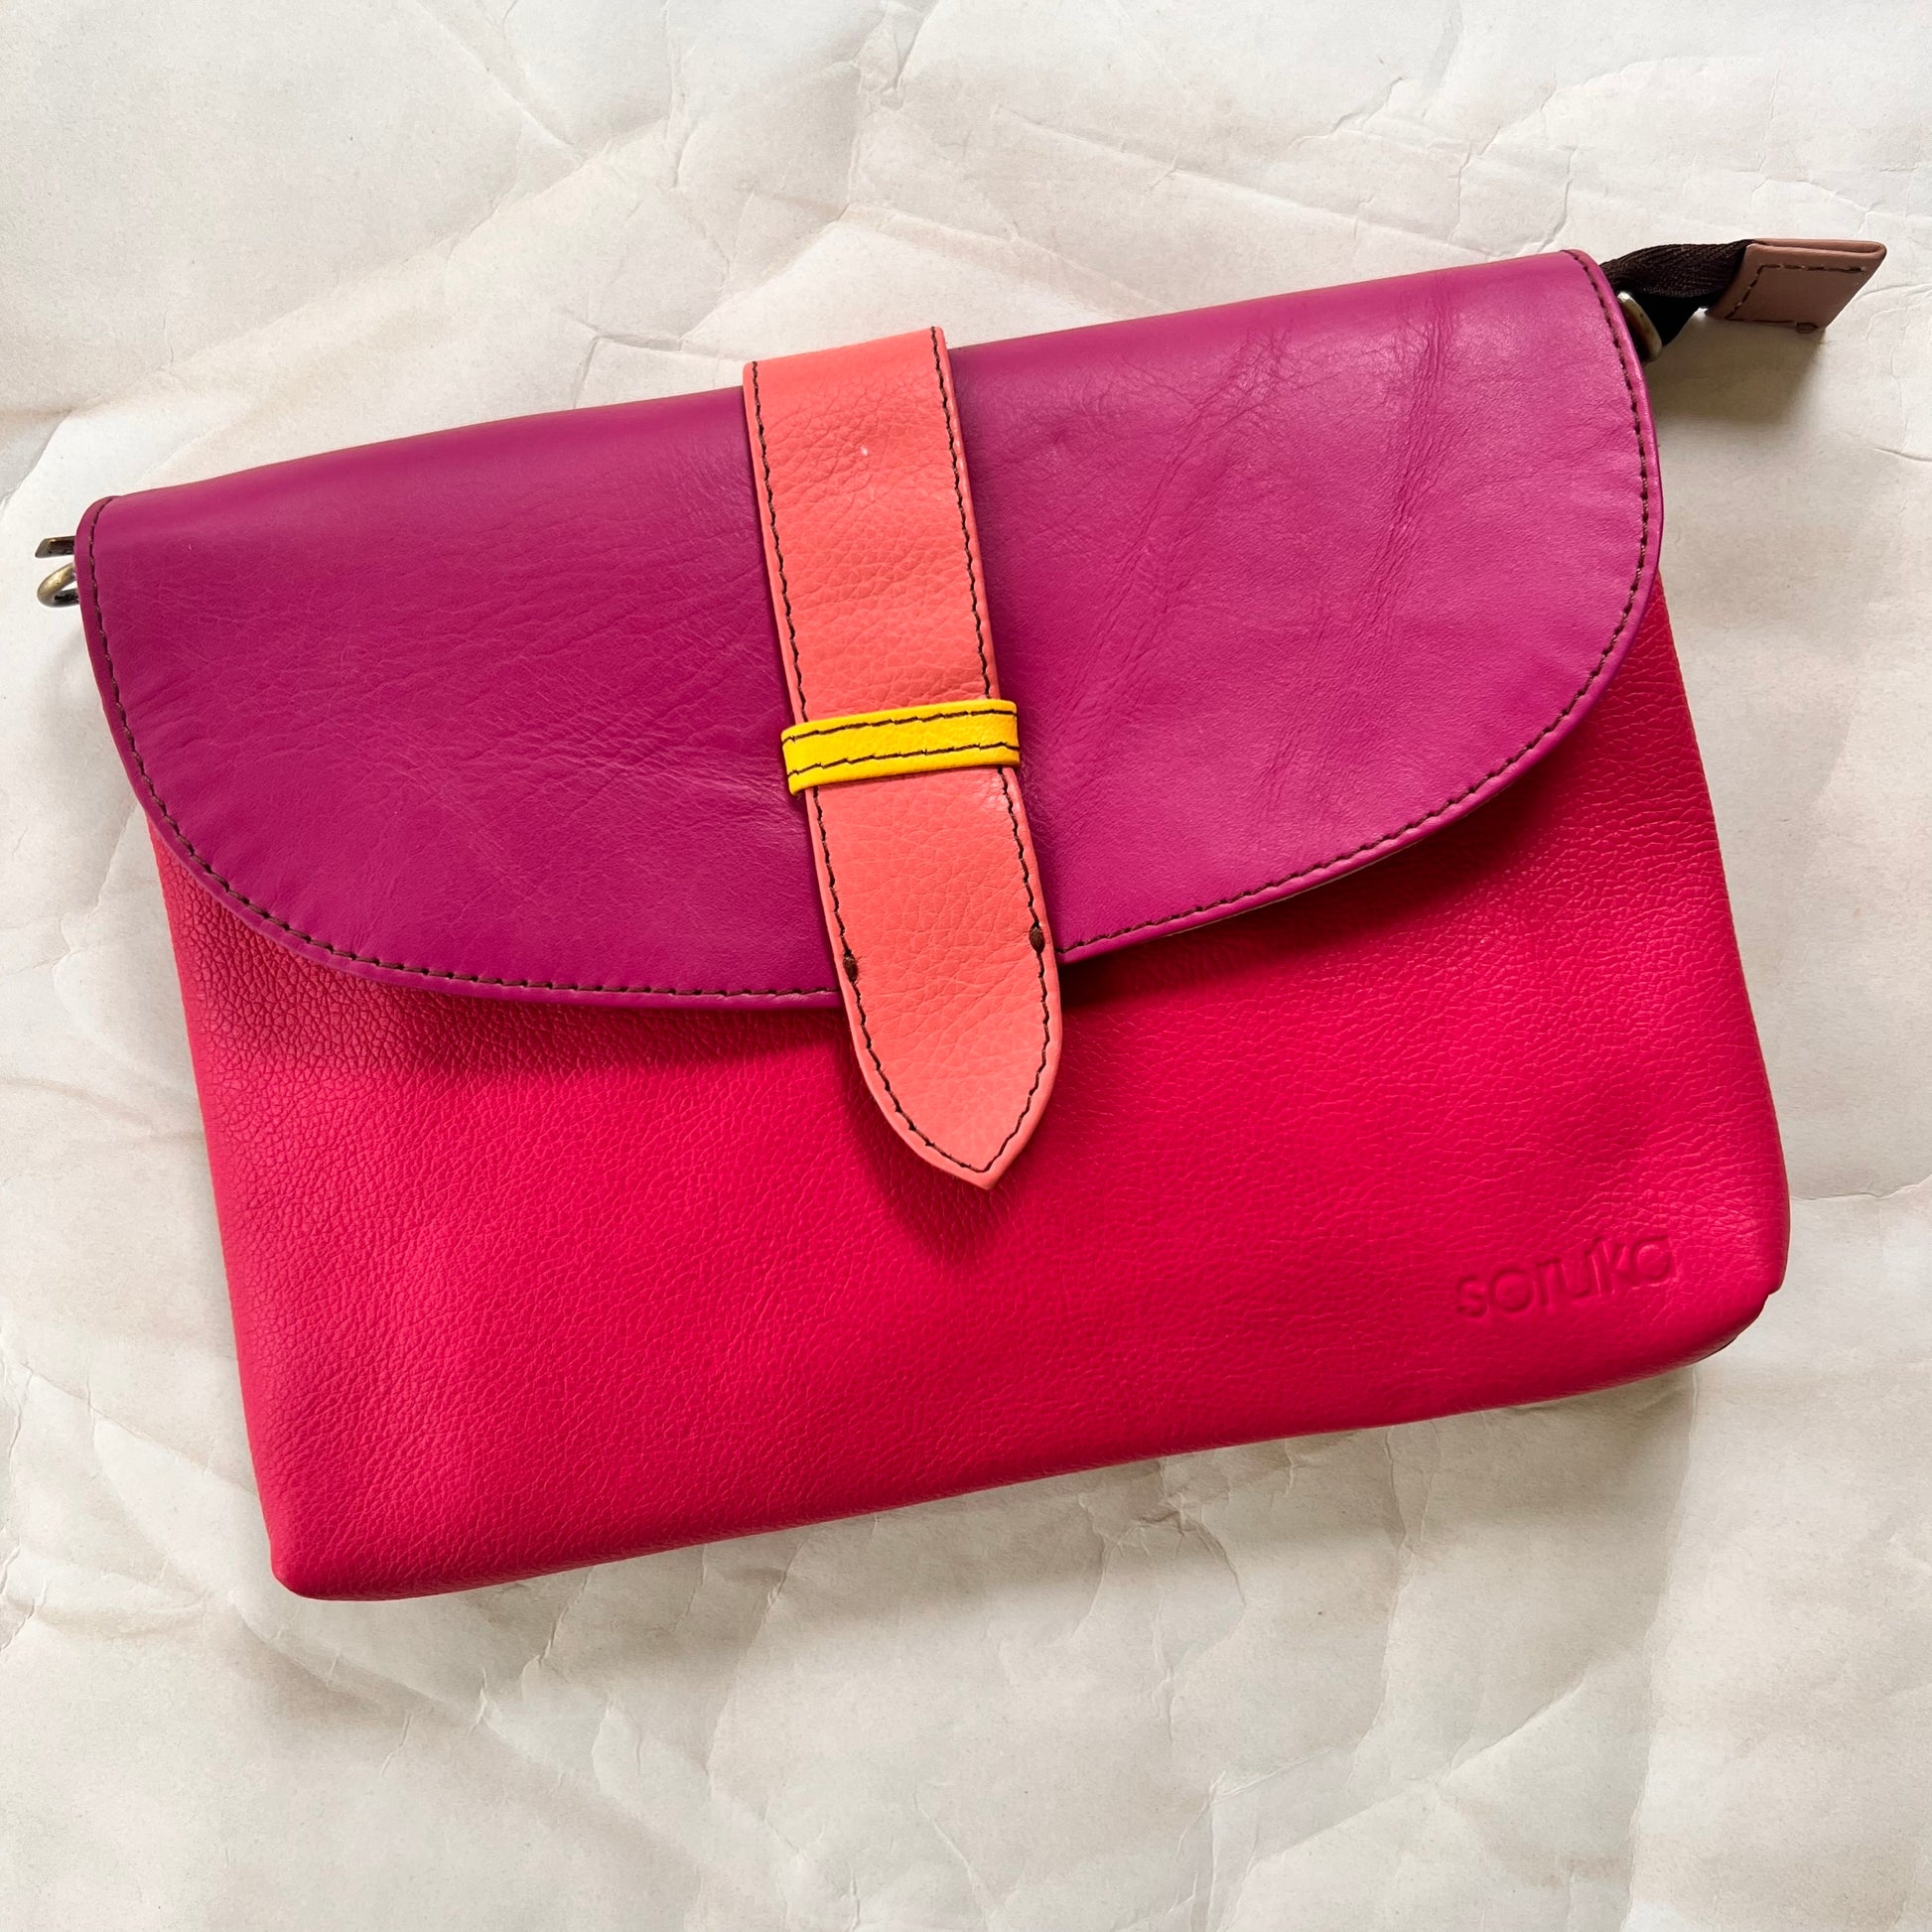 bright pink saddle bag with pink flap and peach tab.